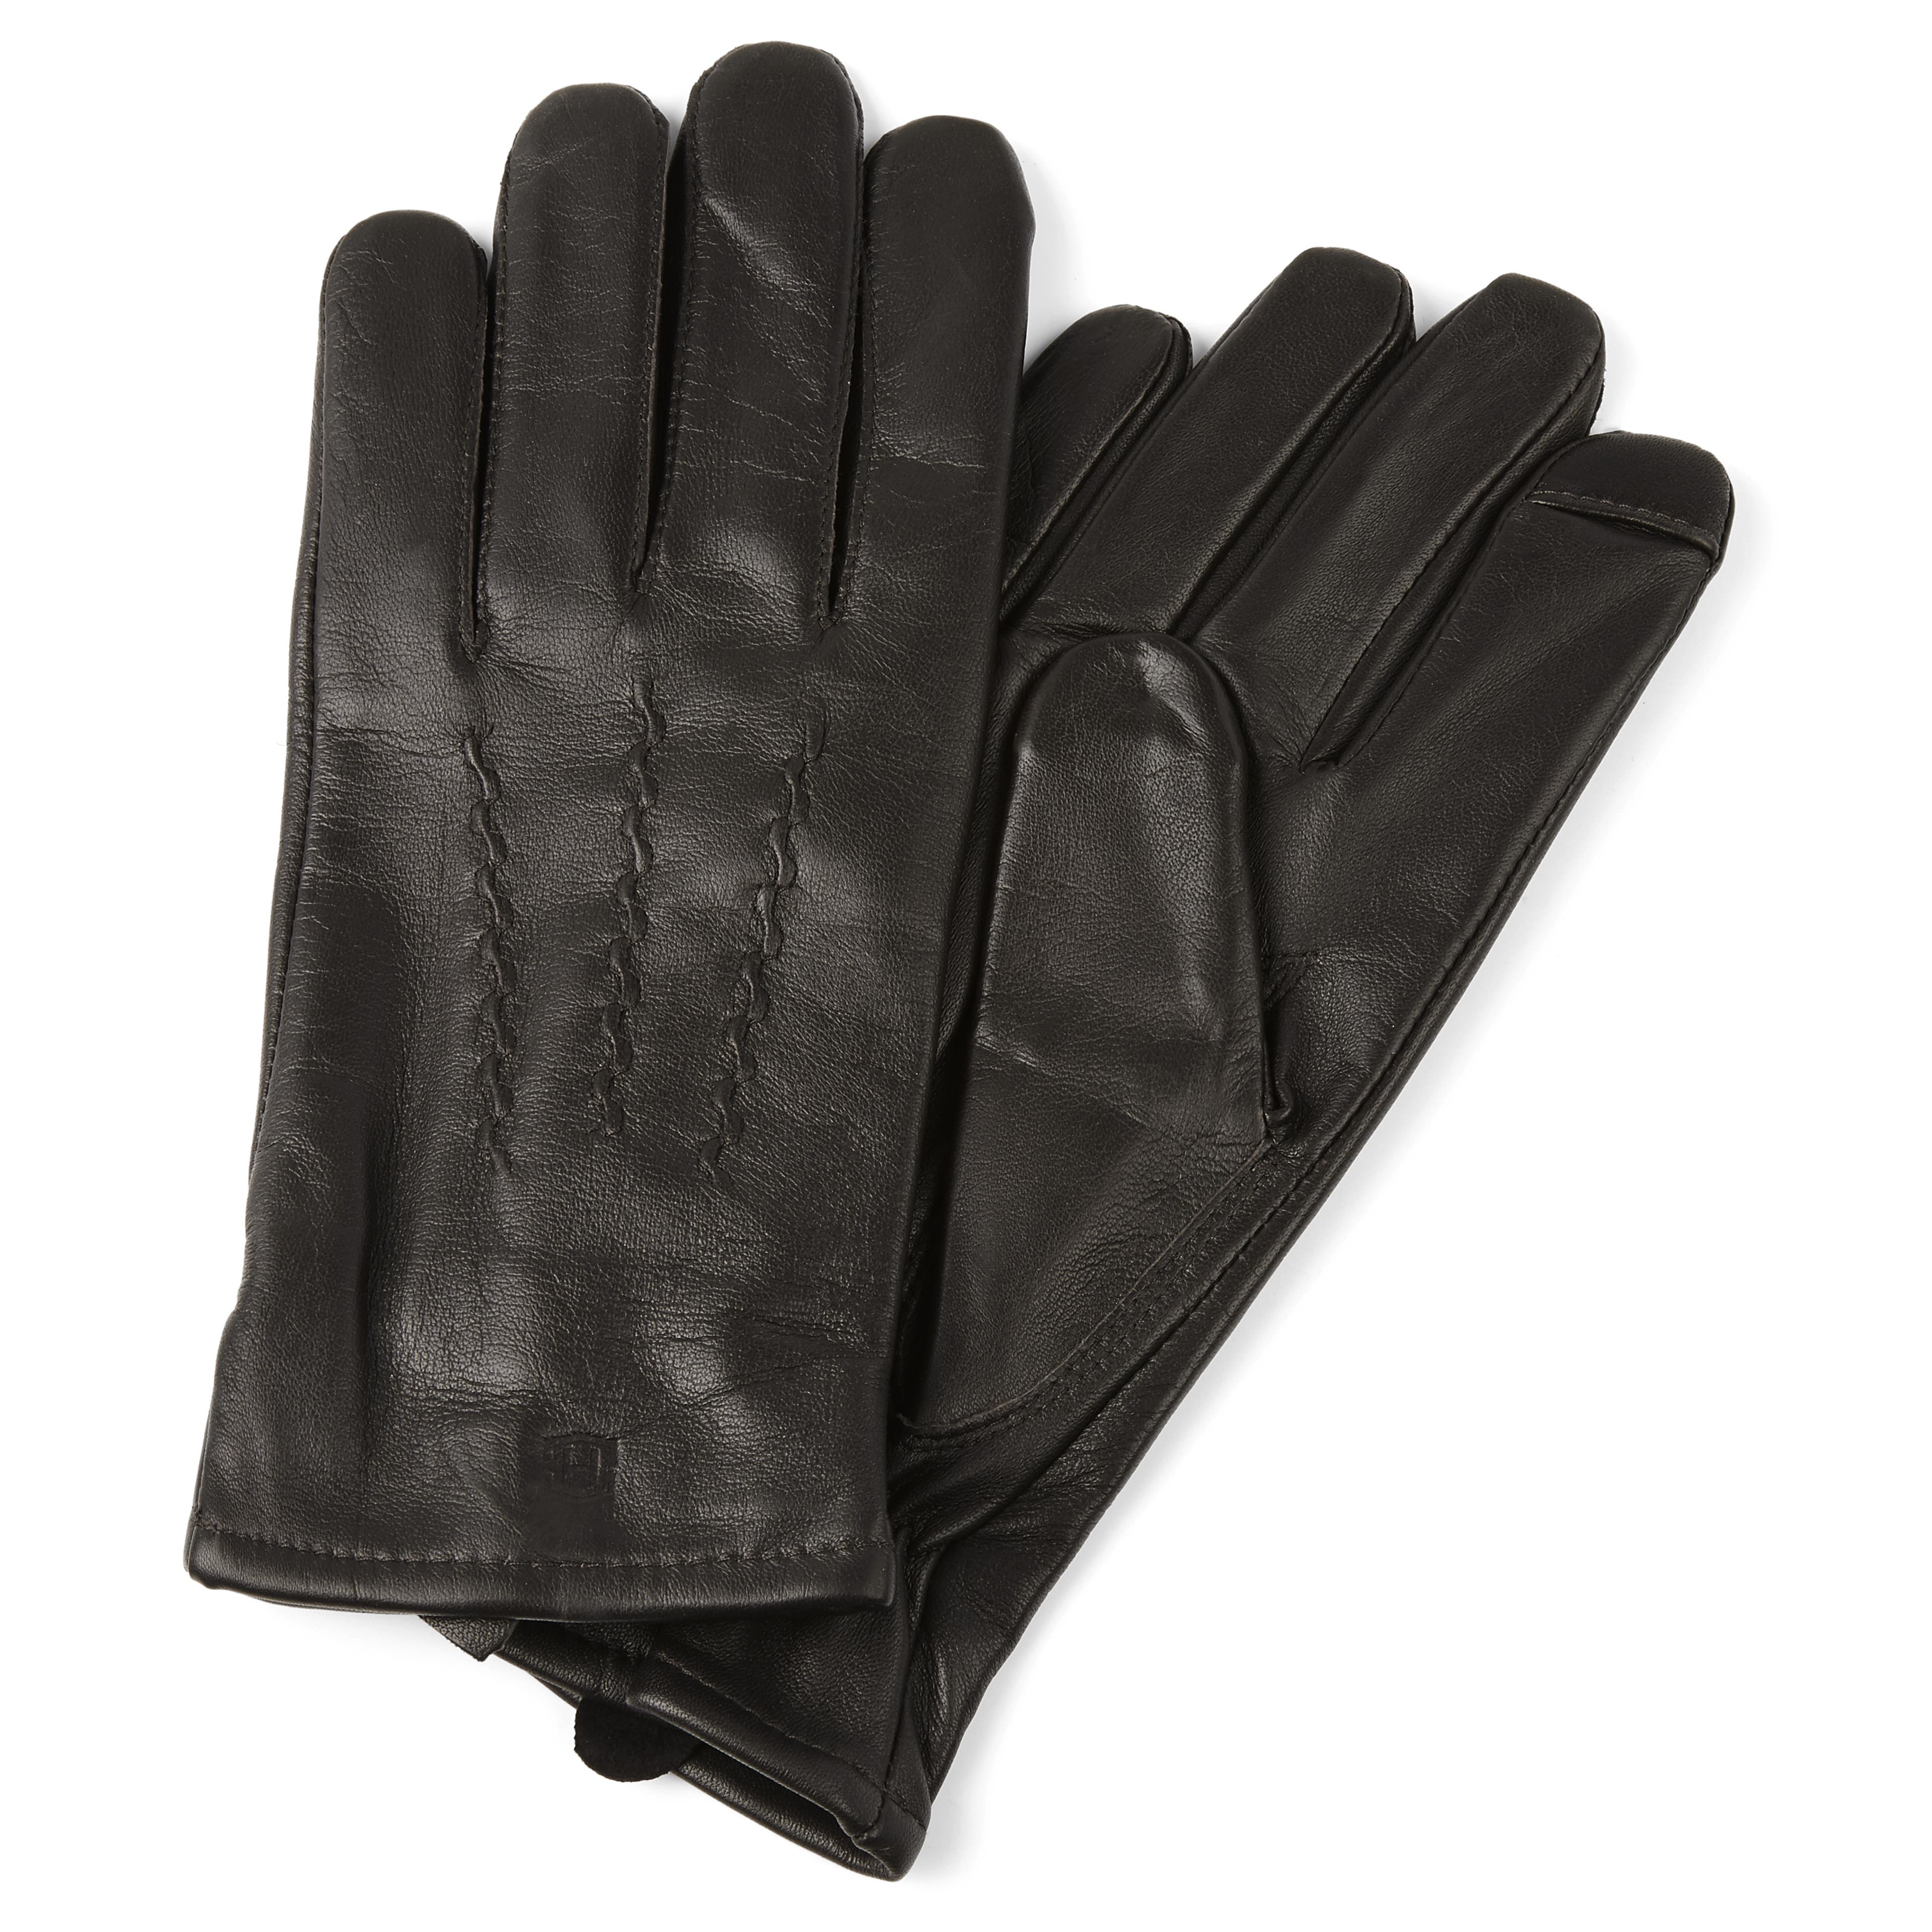 Cuffed Dark Brown Touchscreen Compatible Sheep leather Gloves